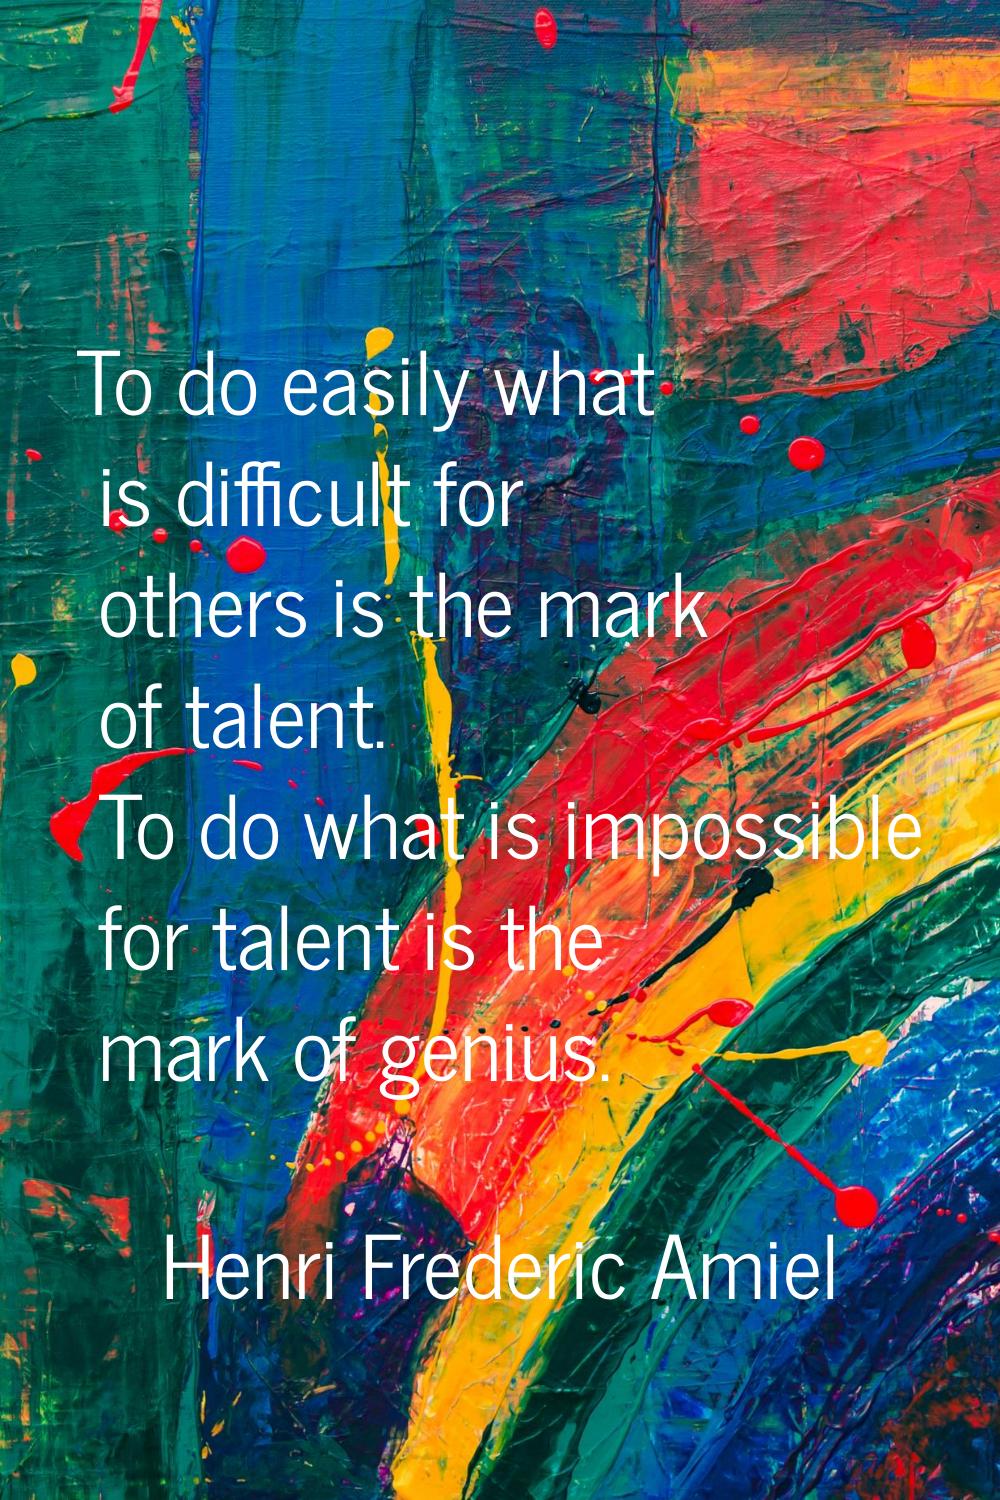 To do easily what is difficult for others is the mark of talent. To do what is impossible for talen